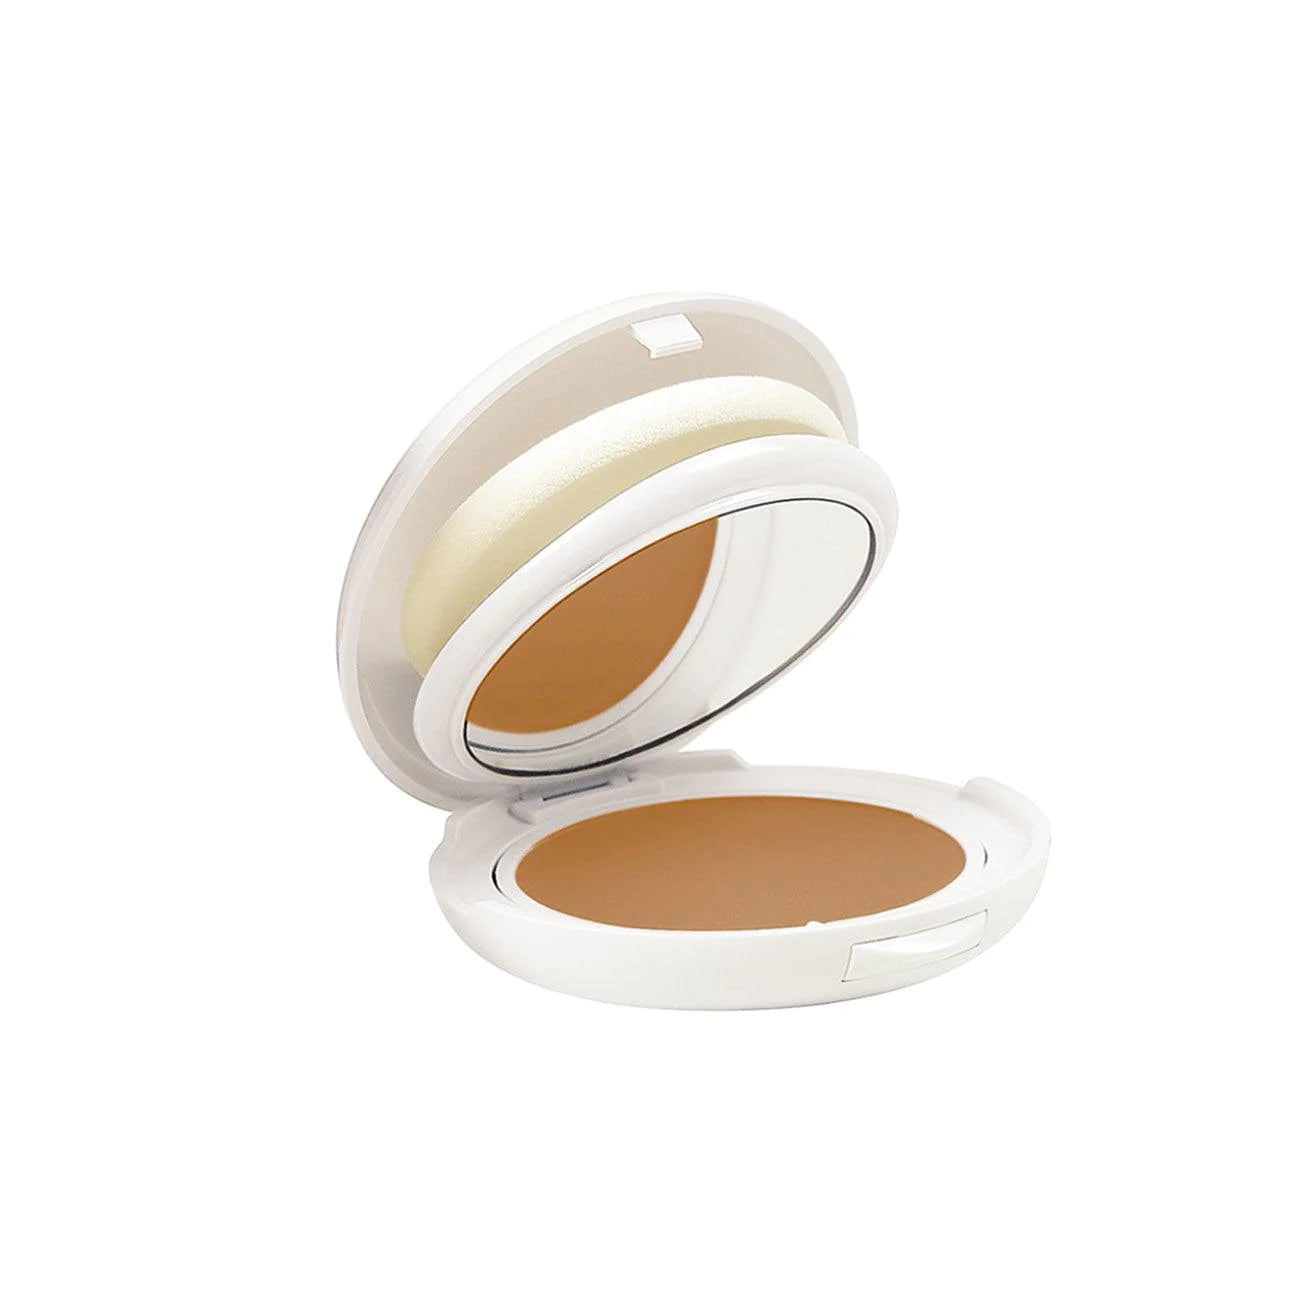 AVÈNE Couvrance Compact Foundation Cream SPF30 - Normal to Combination Sensitive Skin